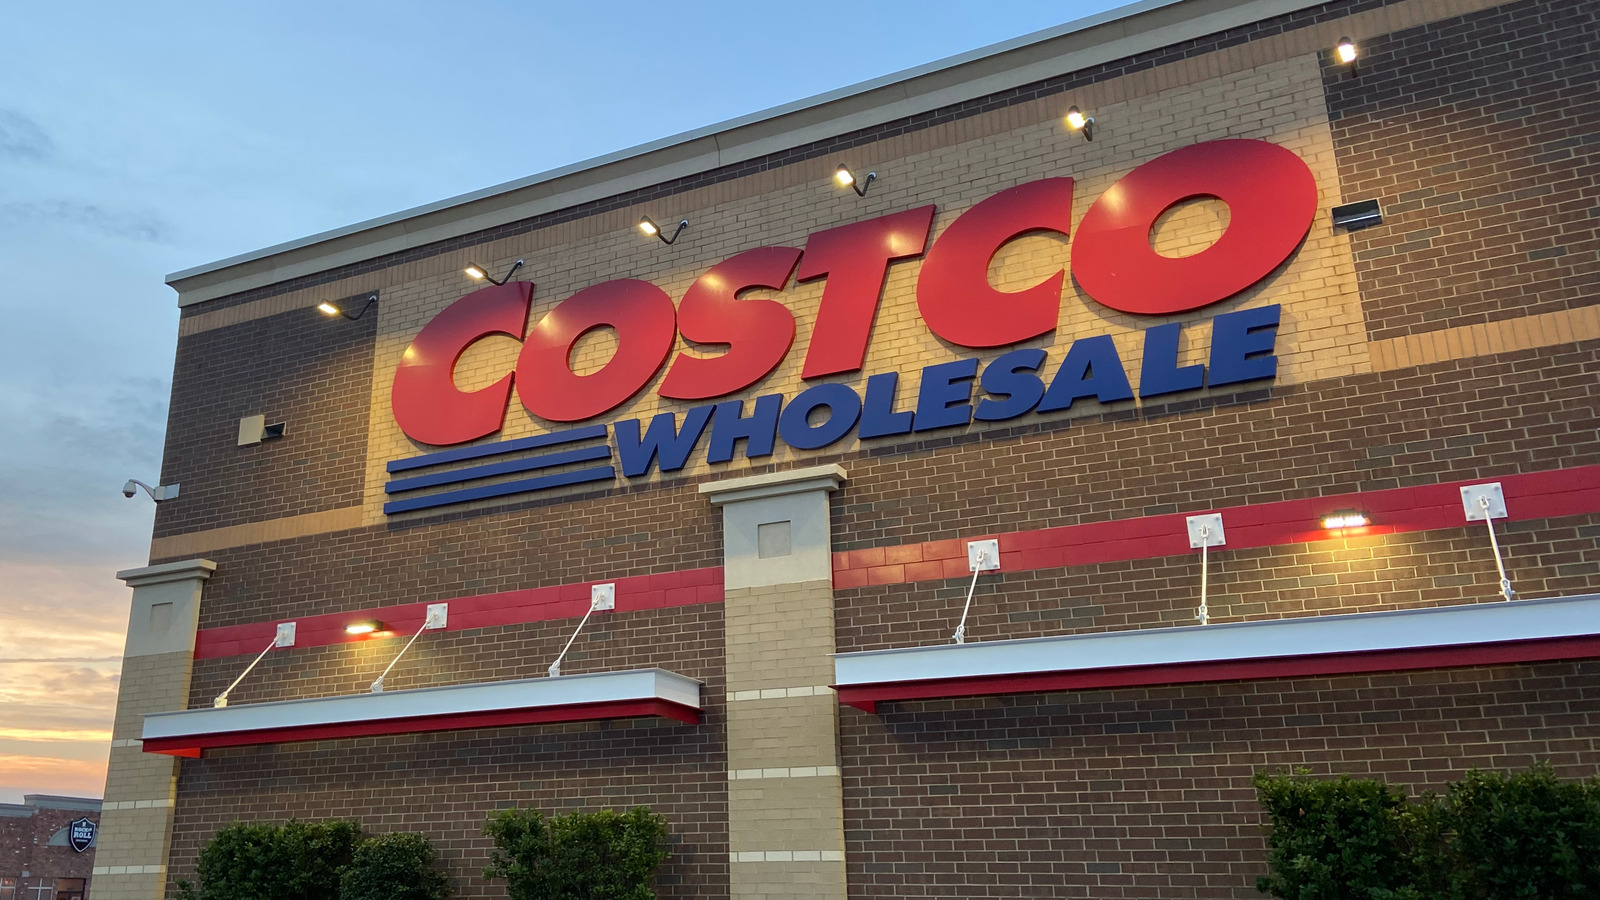 Is Costco Open On Christmas Day 2022?